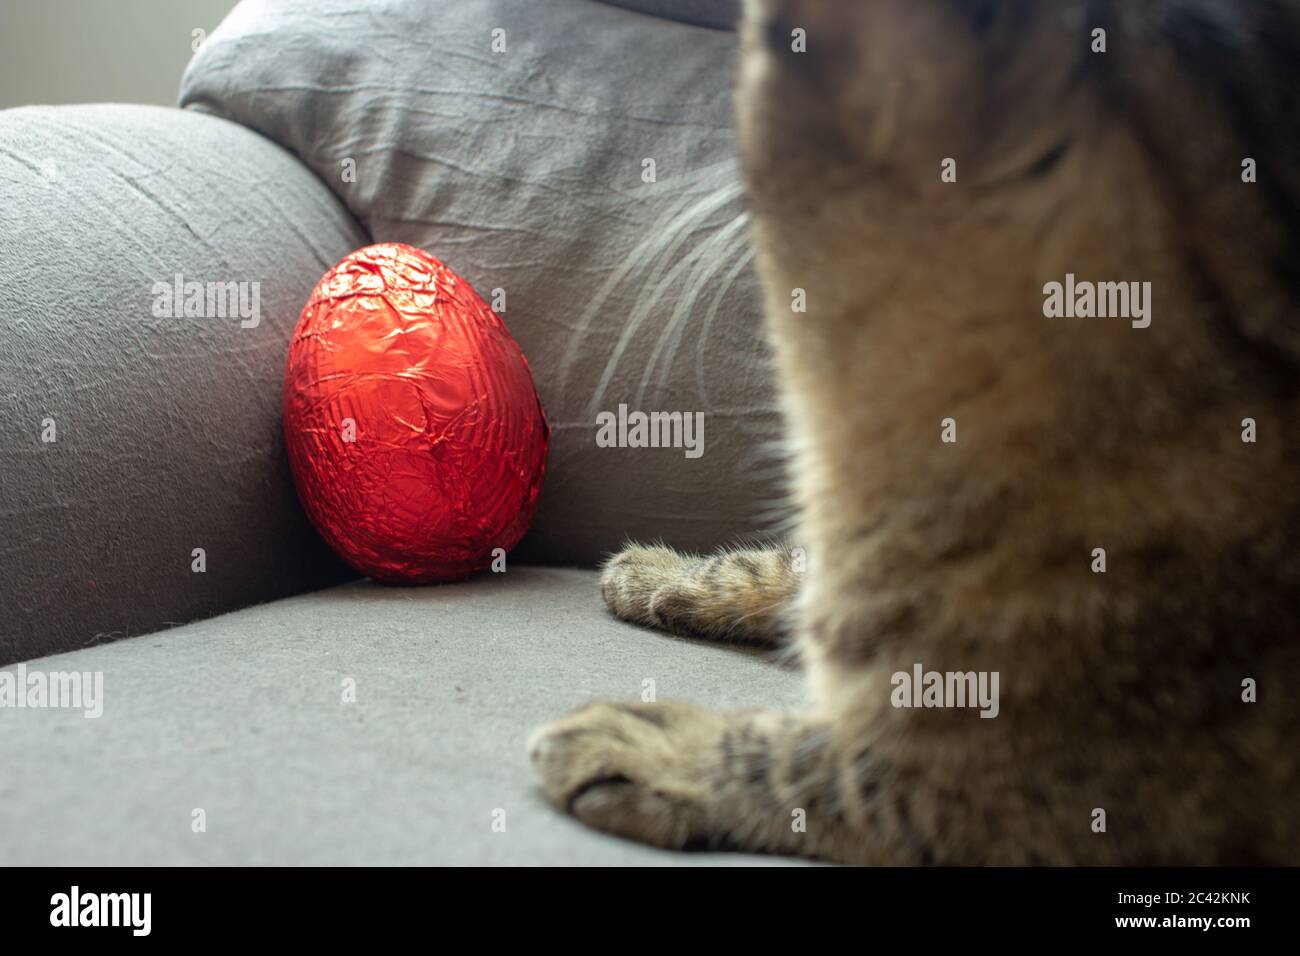 Red easter egg on the corner of a couch still unwrapped with a cat beside it Stock Photo